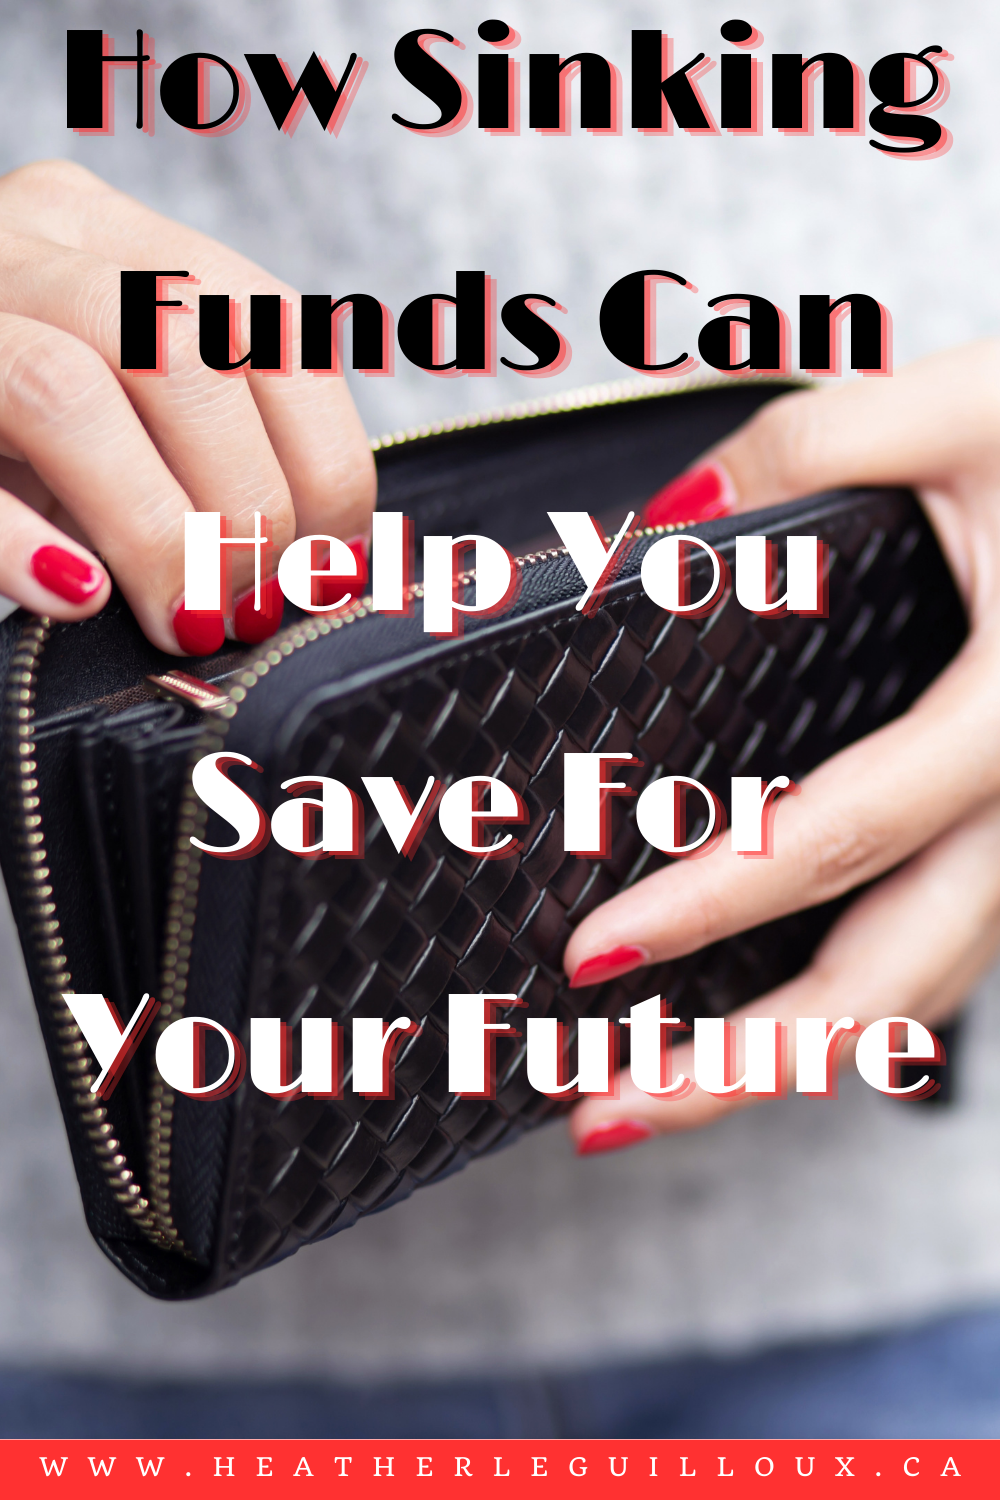 Creating sinking funds with automated fund deposits can be immensely helpful for achieving your dreams. In this article, we will learn more about sinking funds, how to set plan and set these up, and the psychology behind why this method works. #sinkingfund #personalfinance #financematters #savings #saveforyourfuture #savingsaccount